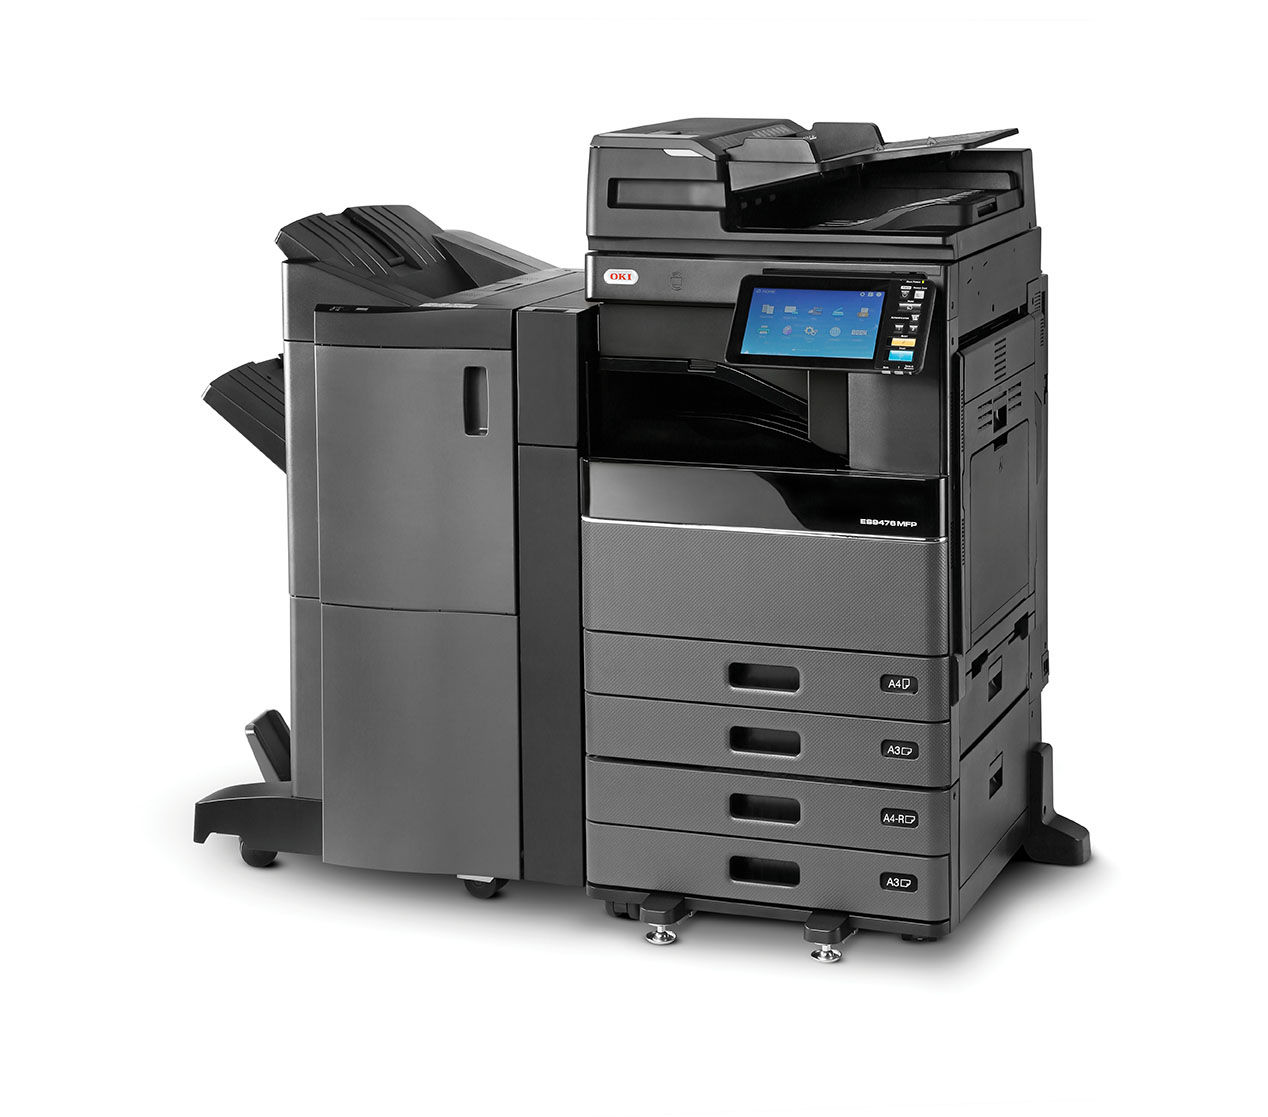 ES9476MFP with DSDF and Saddlestitch finisher